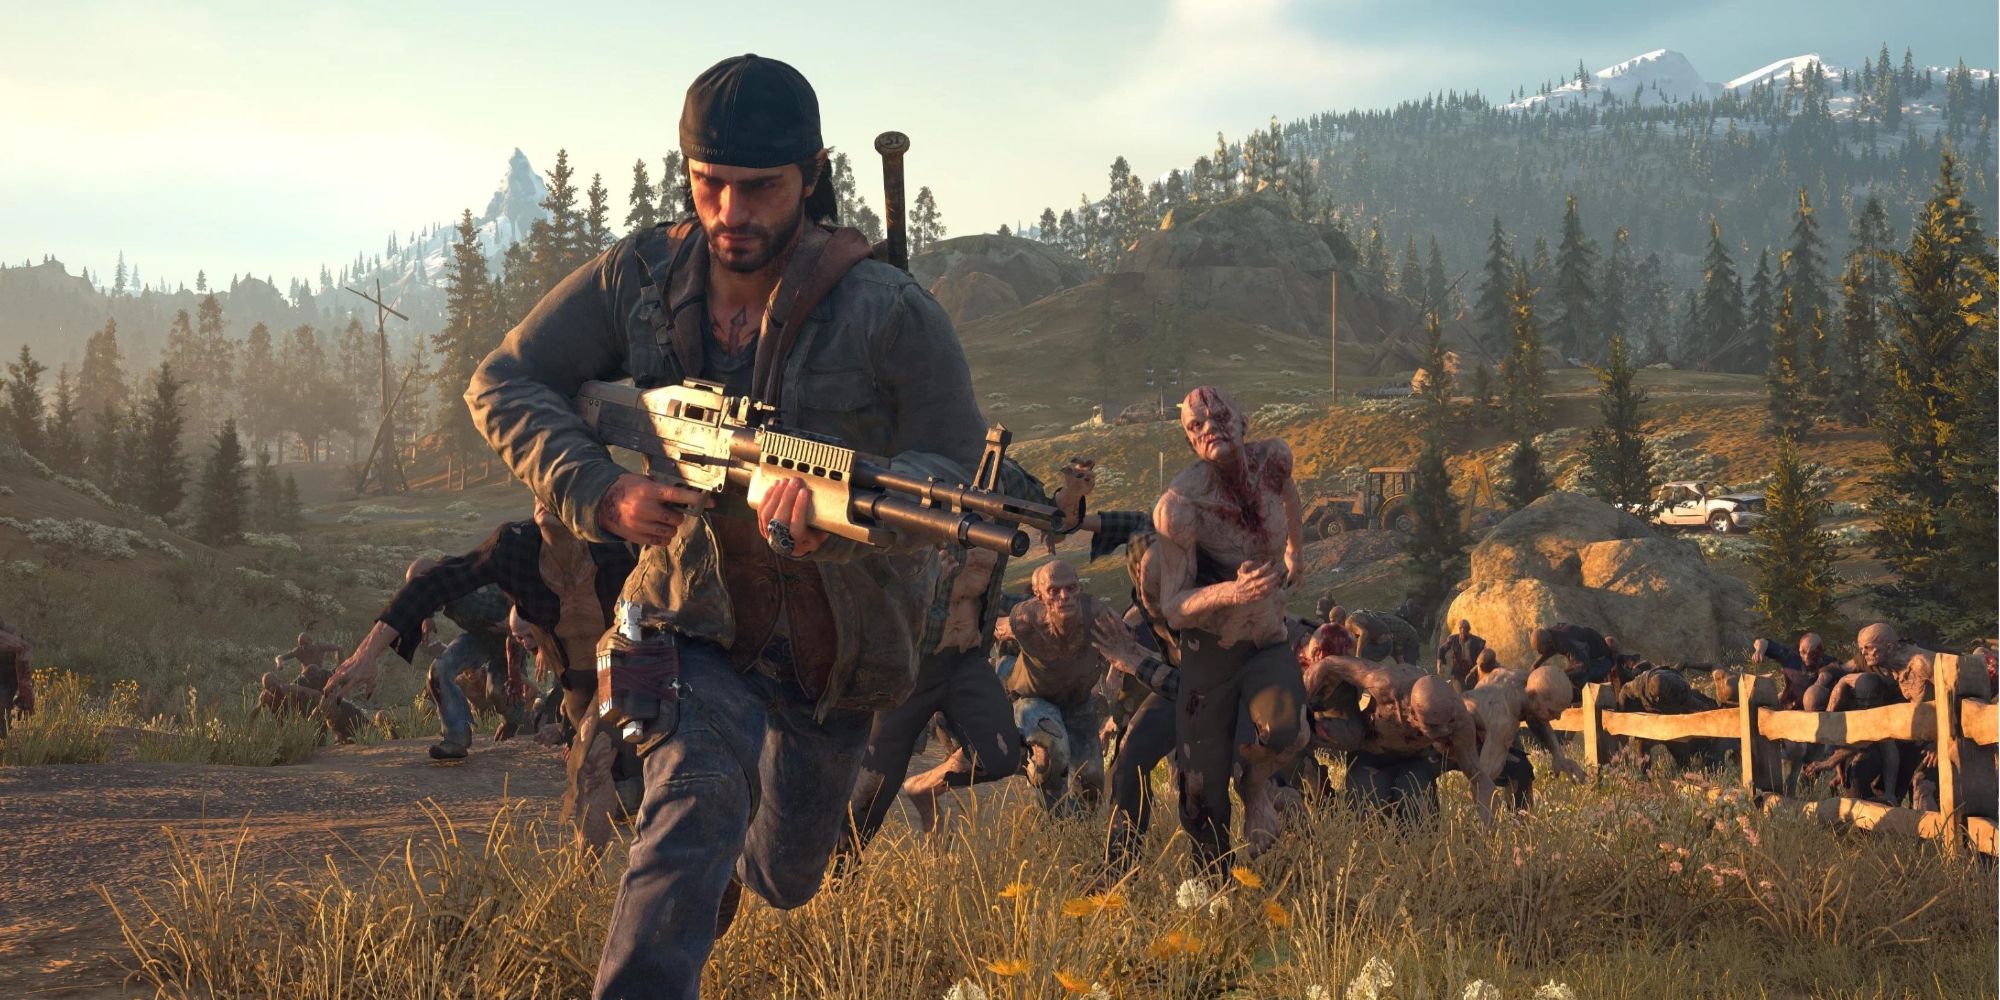 Days Gone has some seriously intense zombie fights